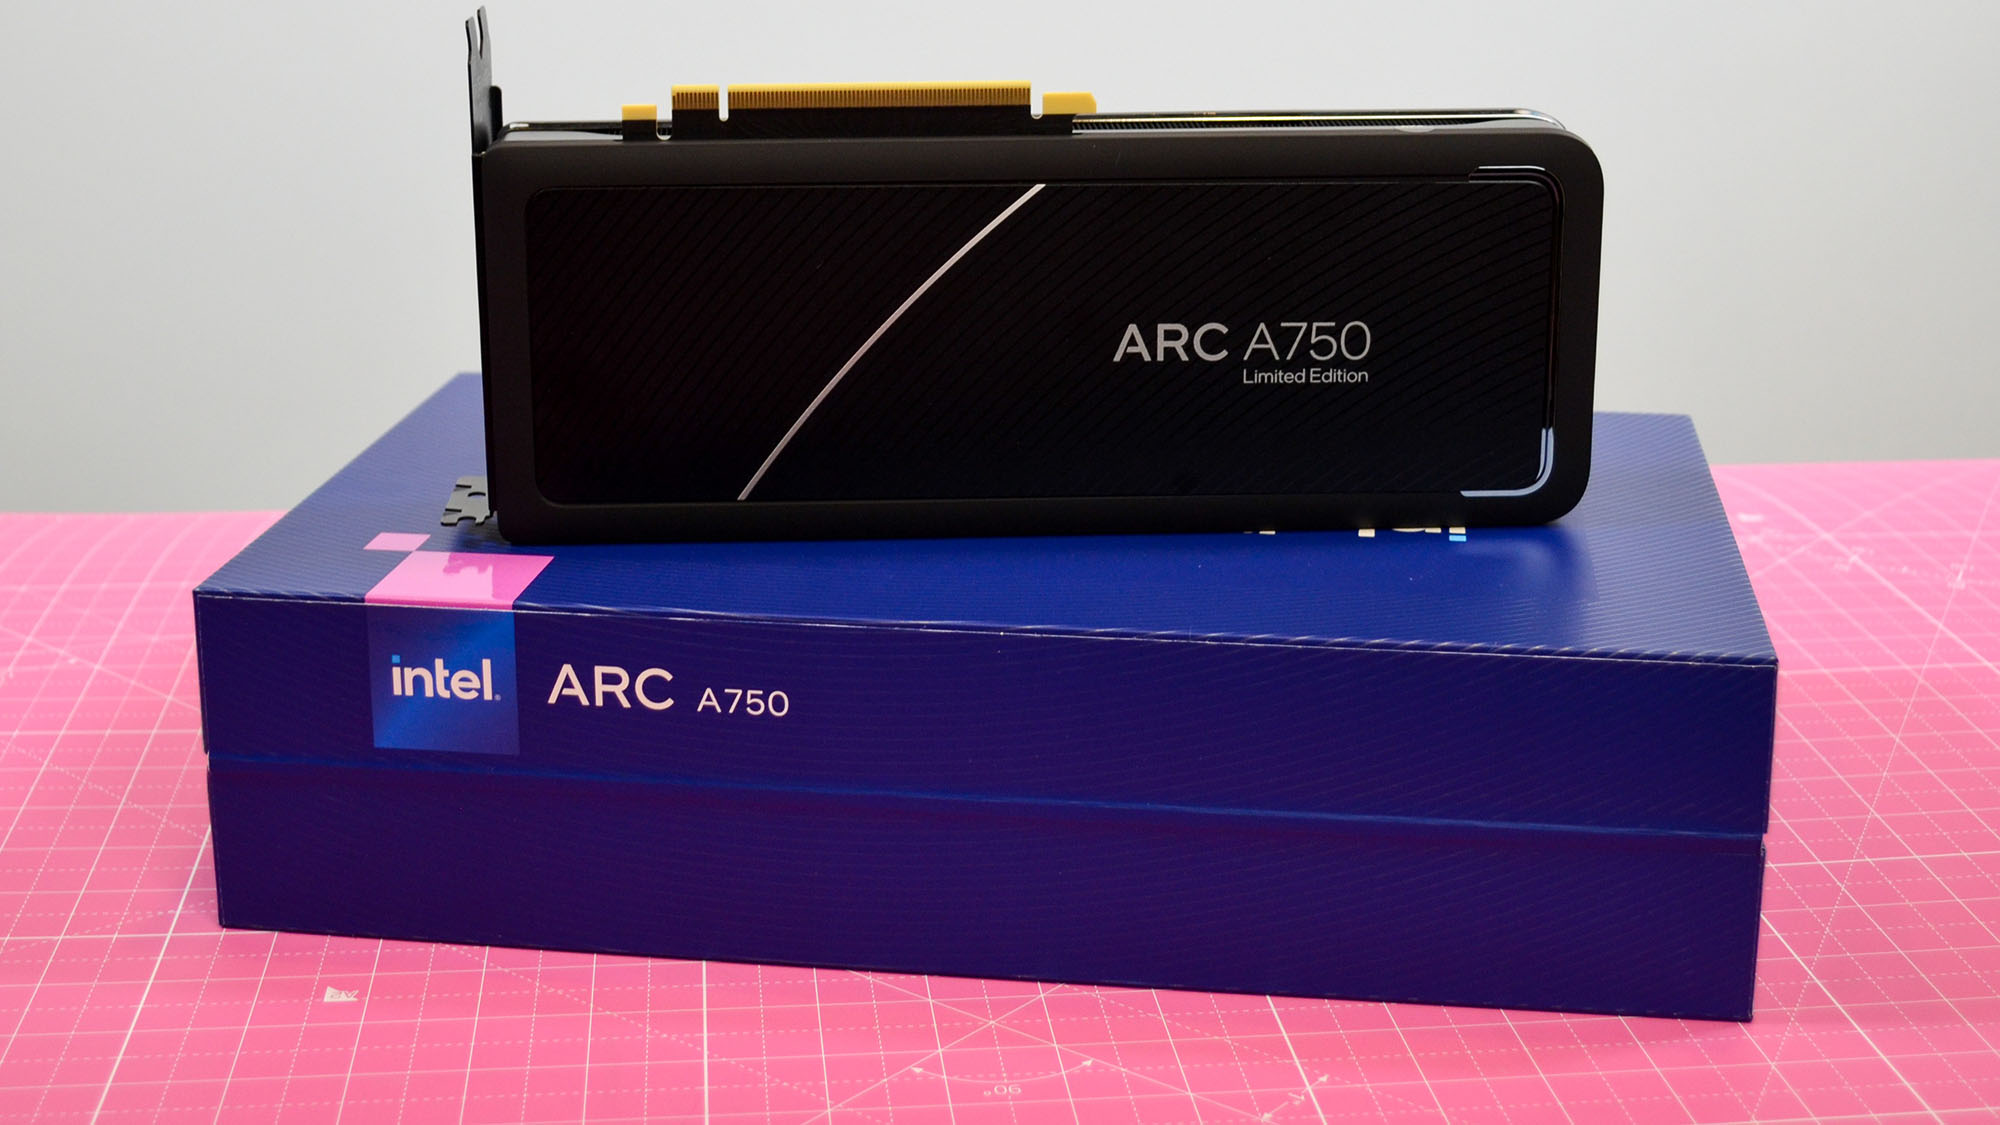 An Intel Arc A750 graphics card on a pink desk mat next to its retain packaging